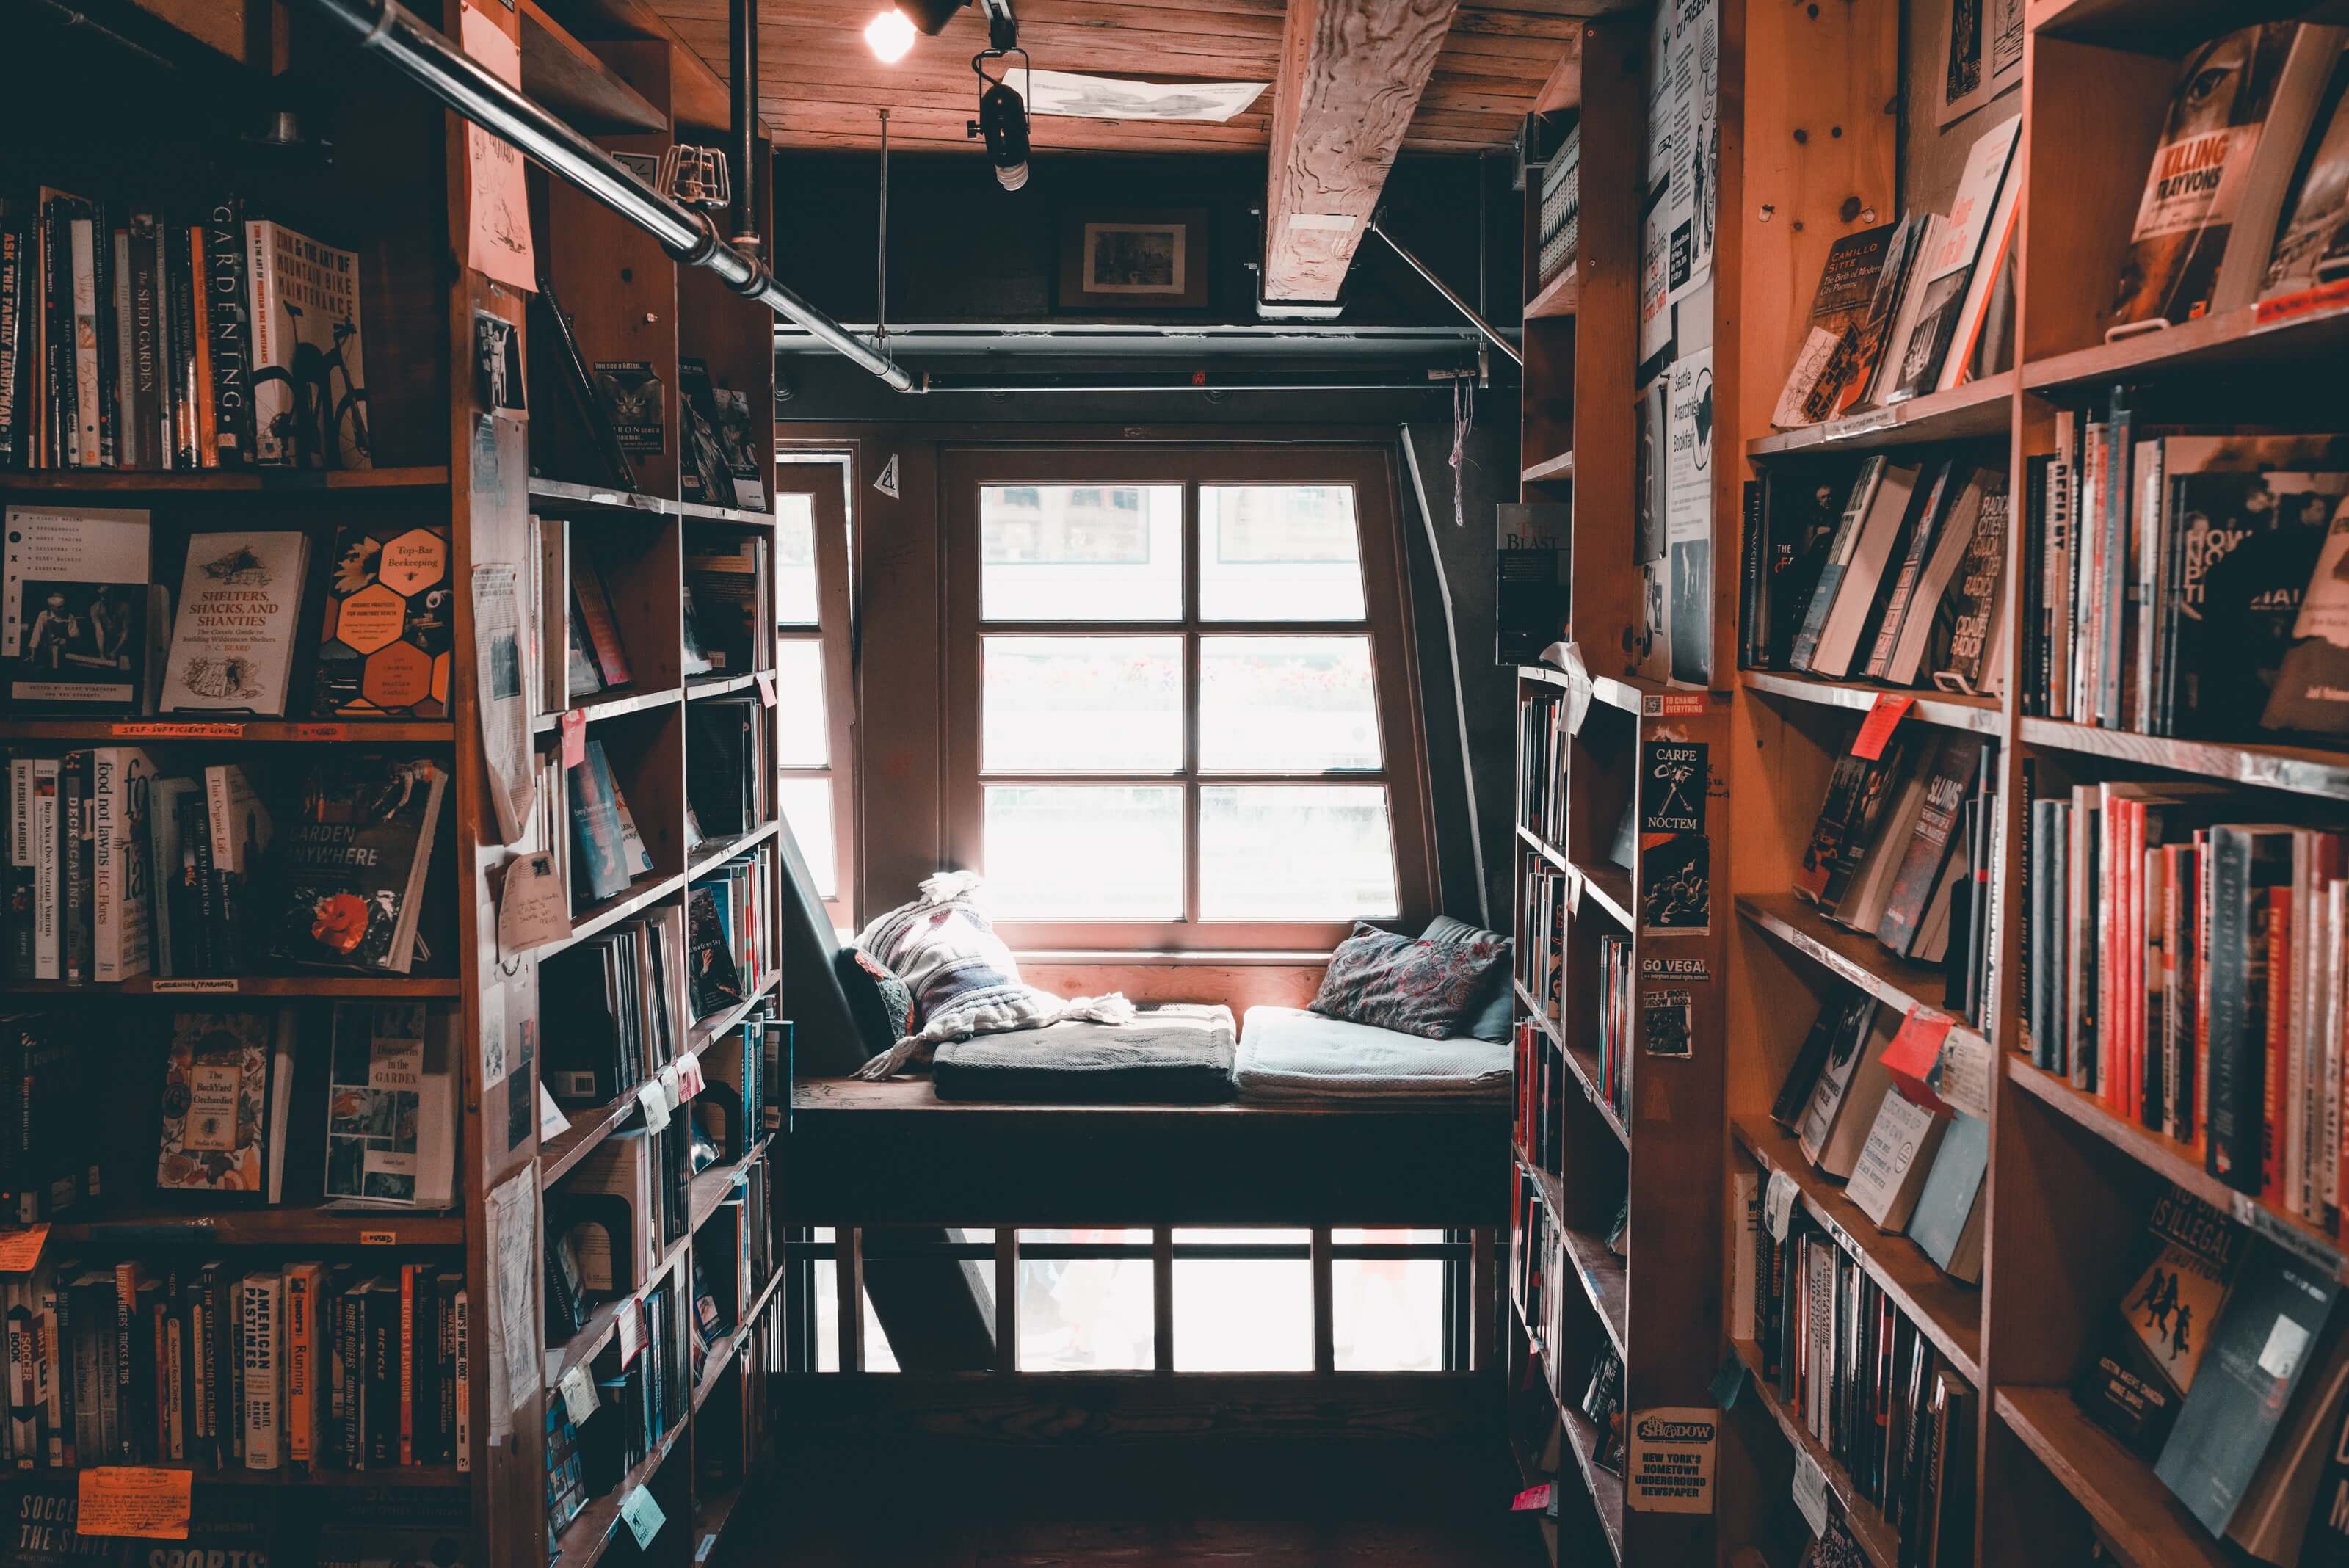 Stock photo by Clay Banks depicting a window seat in between multiple bookshelves filled with stacks of books.